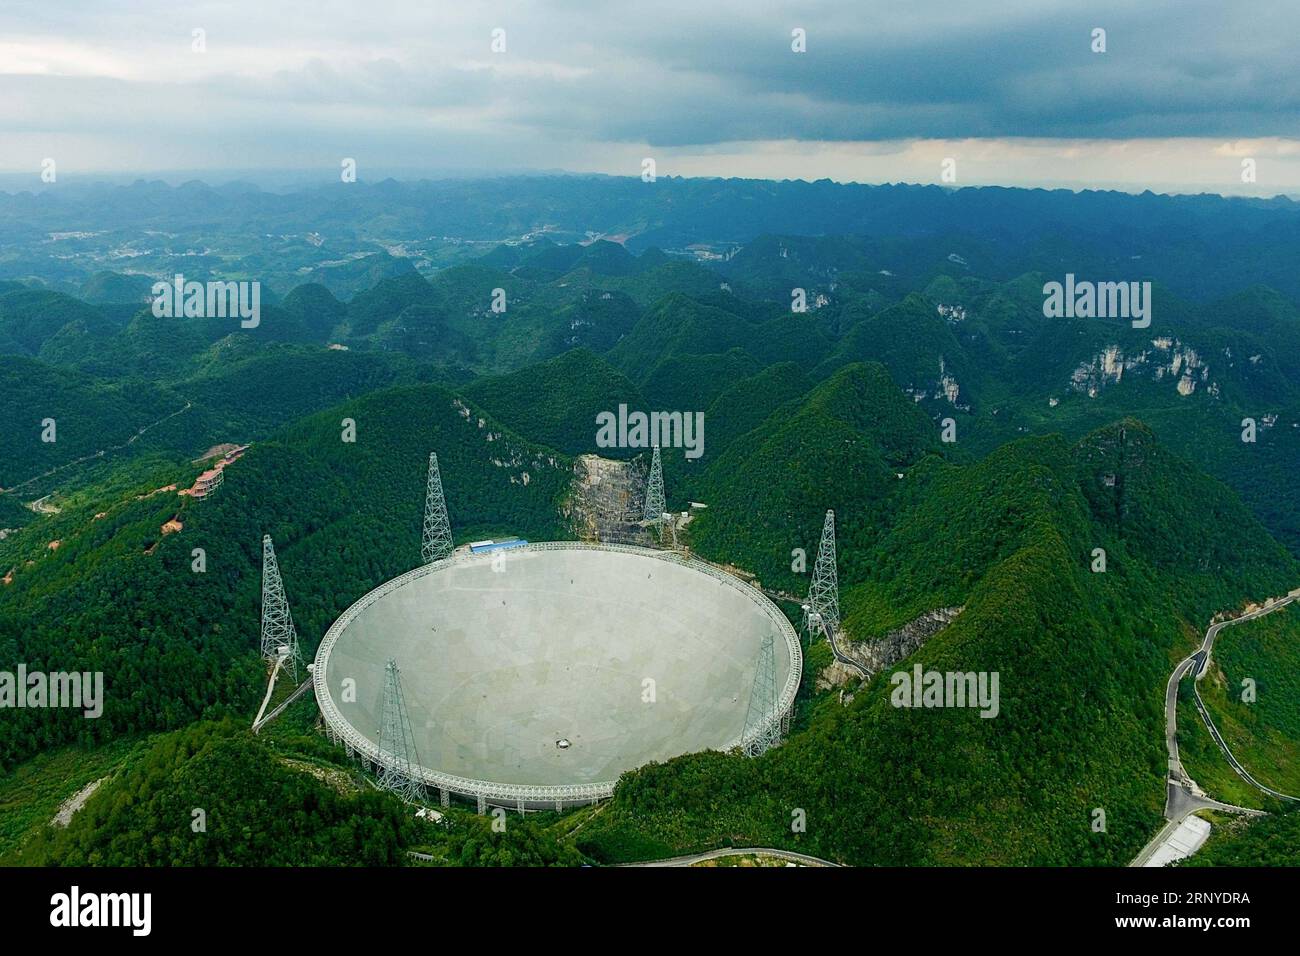 (180313) -- GUIYANG, March 13, 2018 -- File photo taken on Aug. 9, 2017, shows the Five-hundred-meter Aperture Spherical Radio Telescope (FAST) in Pingtang County, southwest China s Guizhou Province. China s FAST, the world s largest single-dish radio telescope, has discovered 11 new pulsars so far, the National Astronomical Observatories of China (NAOC) said Tuesday. )(wsw) CHINA-GUIZHOU-FAST-11 NEW PULSARS (CN) OuxDongqu PUBLICATIONxNOTxINxCHN Stock Photo